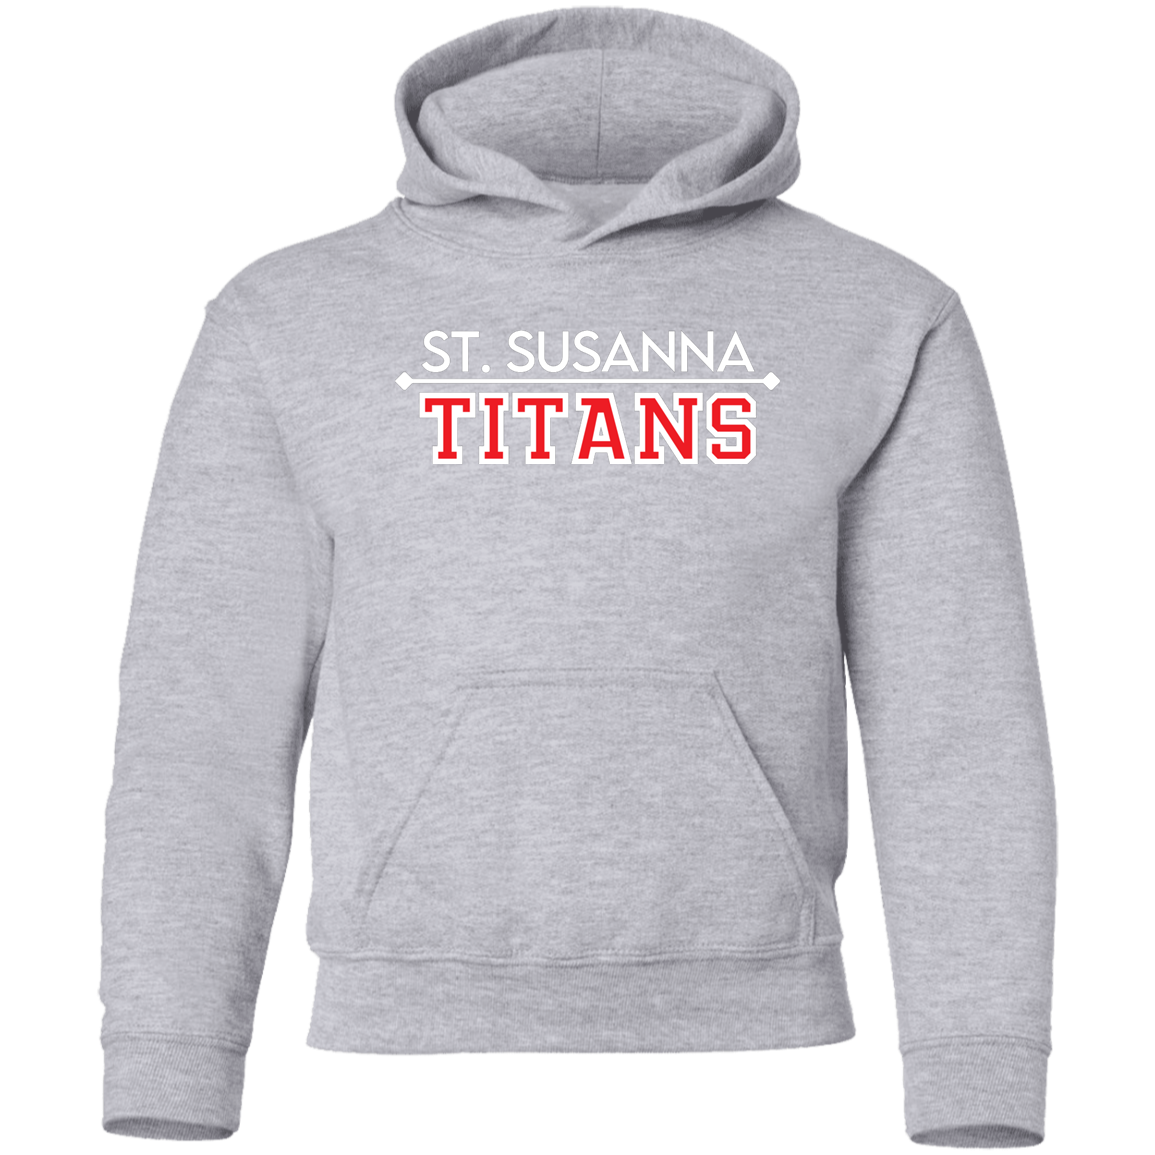 St. Susanna TITANS (Black and Gray) Kids' Pullover Hoodie